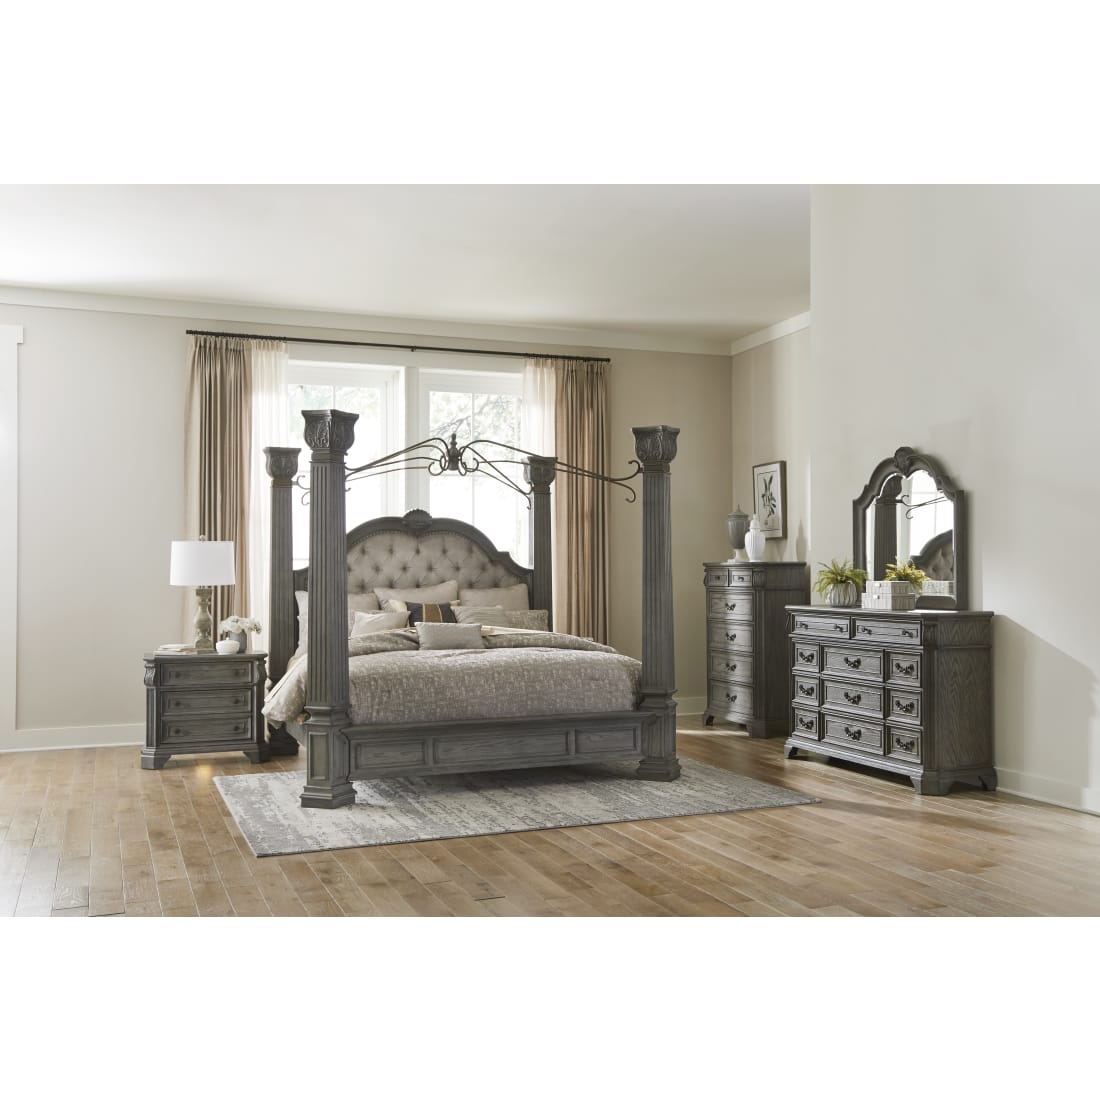 Colossus 3 pc Queen Bedroom